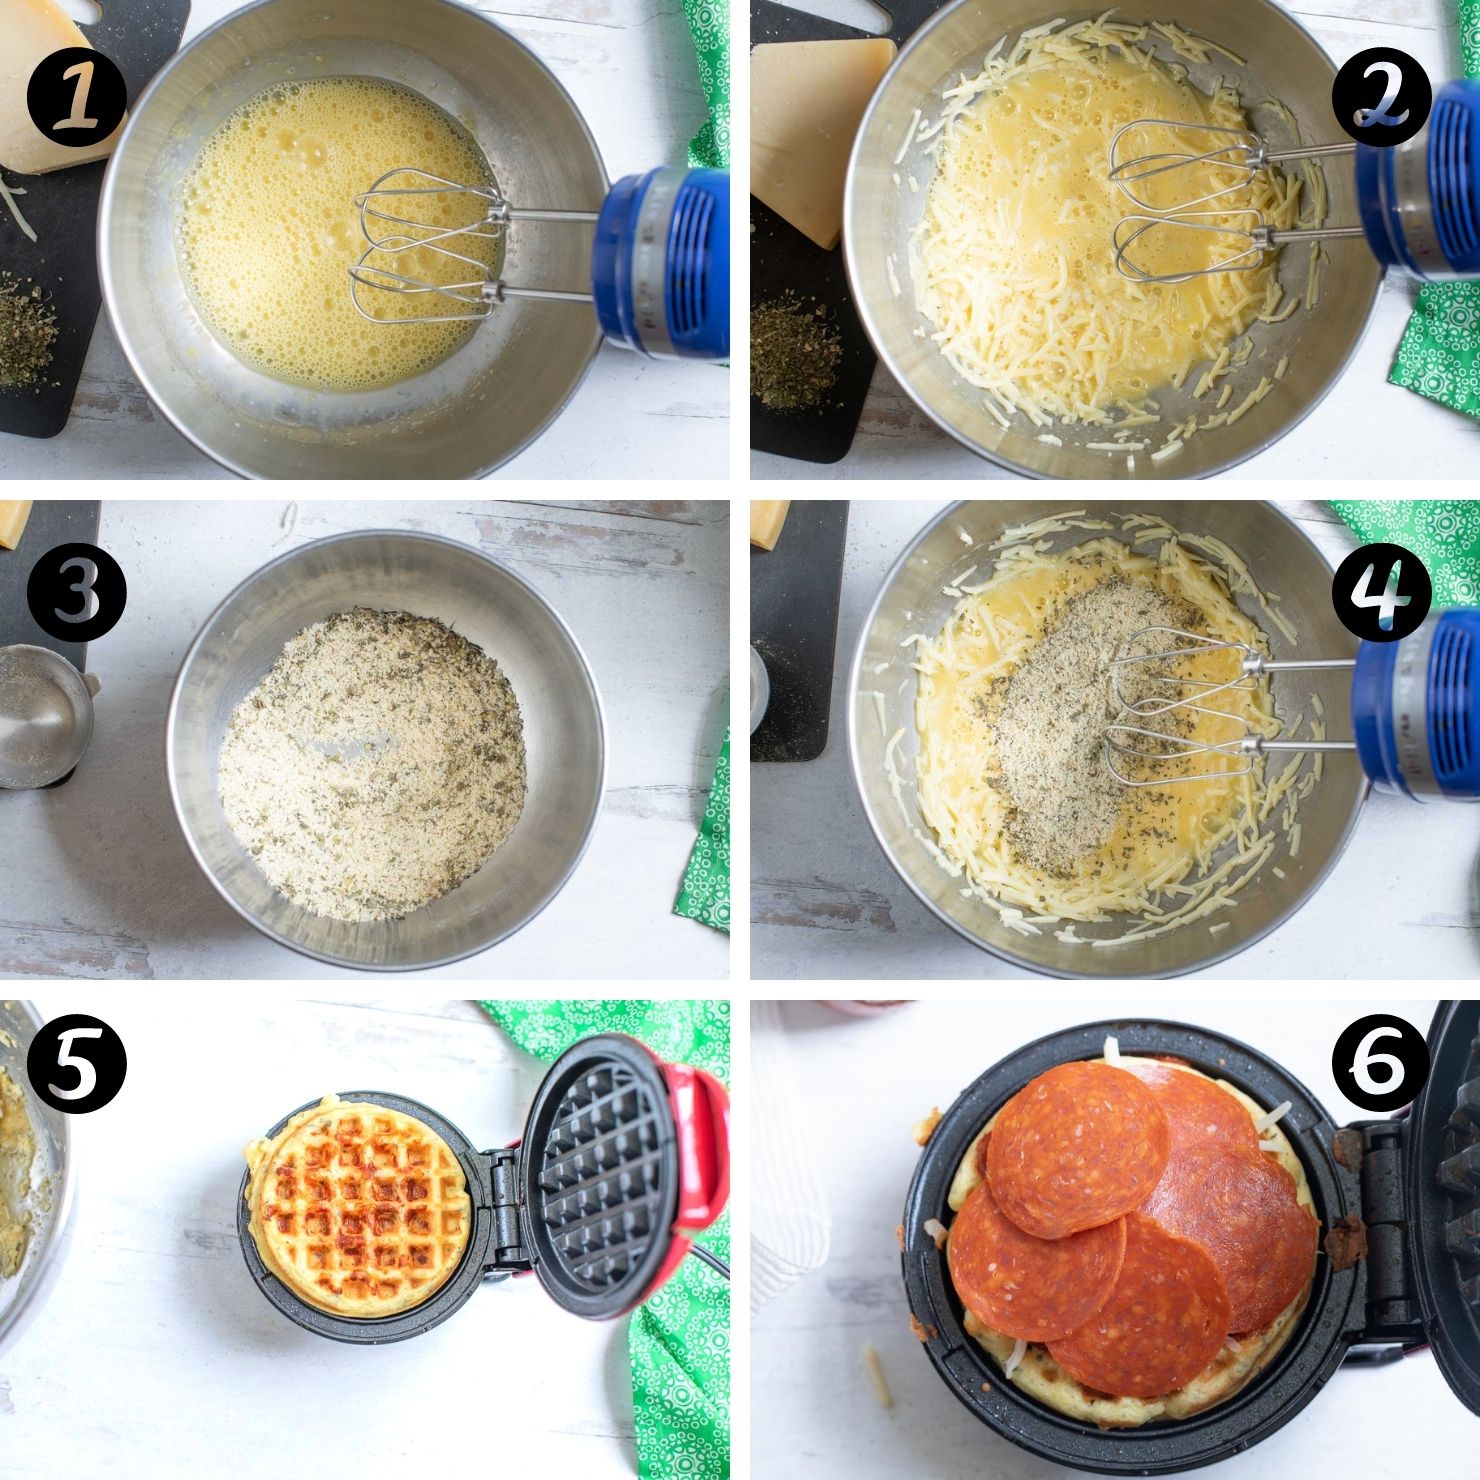 The 6 steps to making chaffles from adding all the ingredients to the completed product.